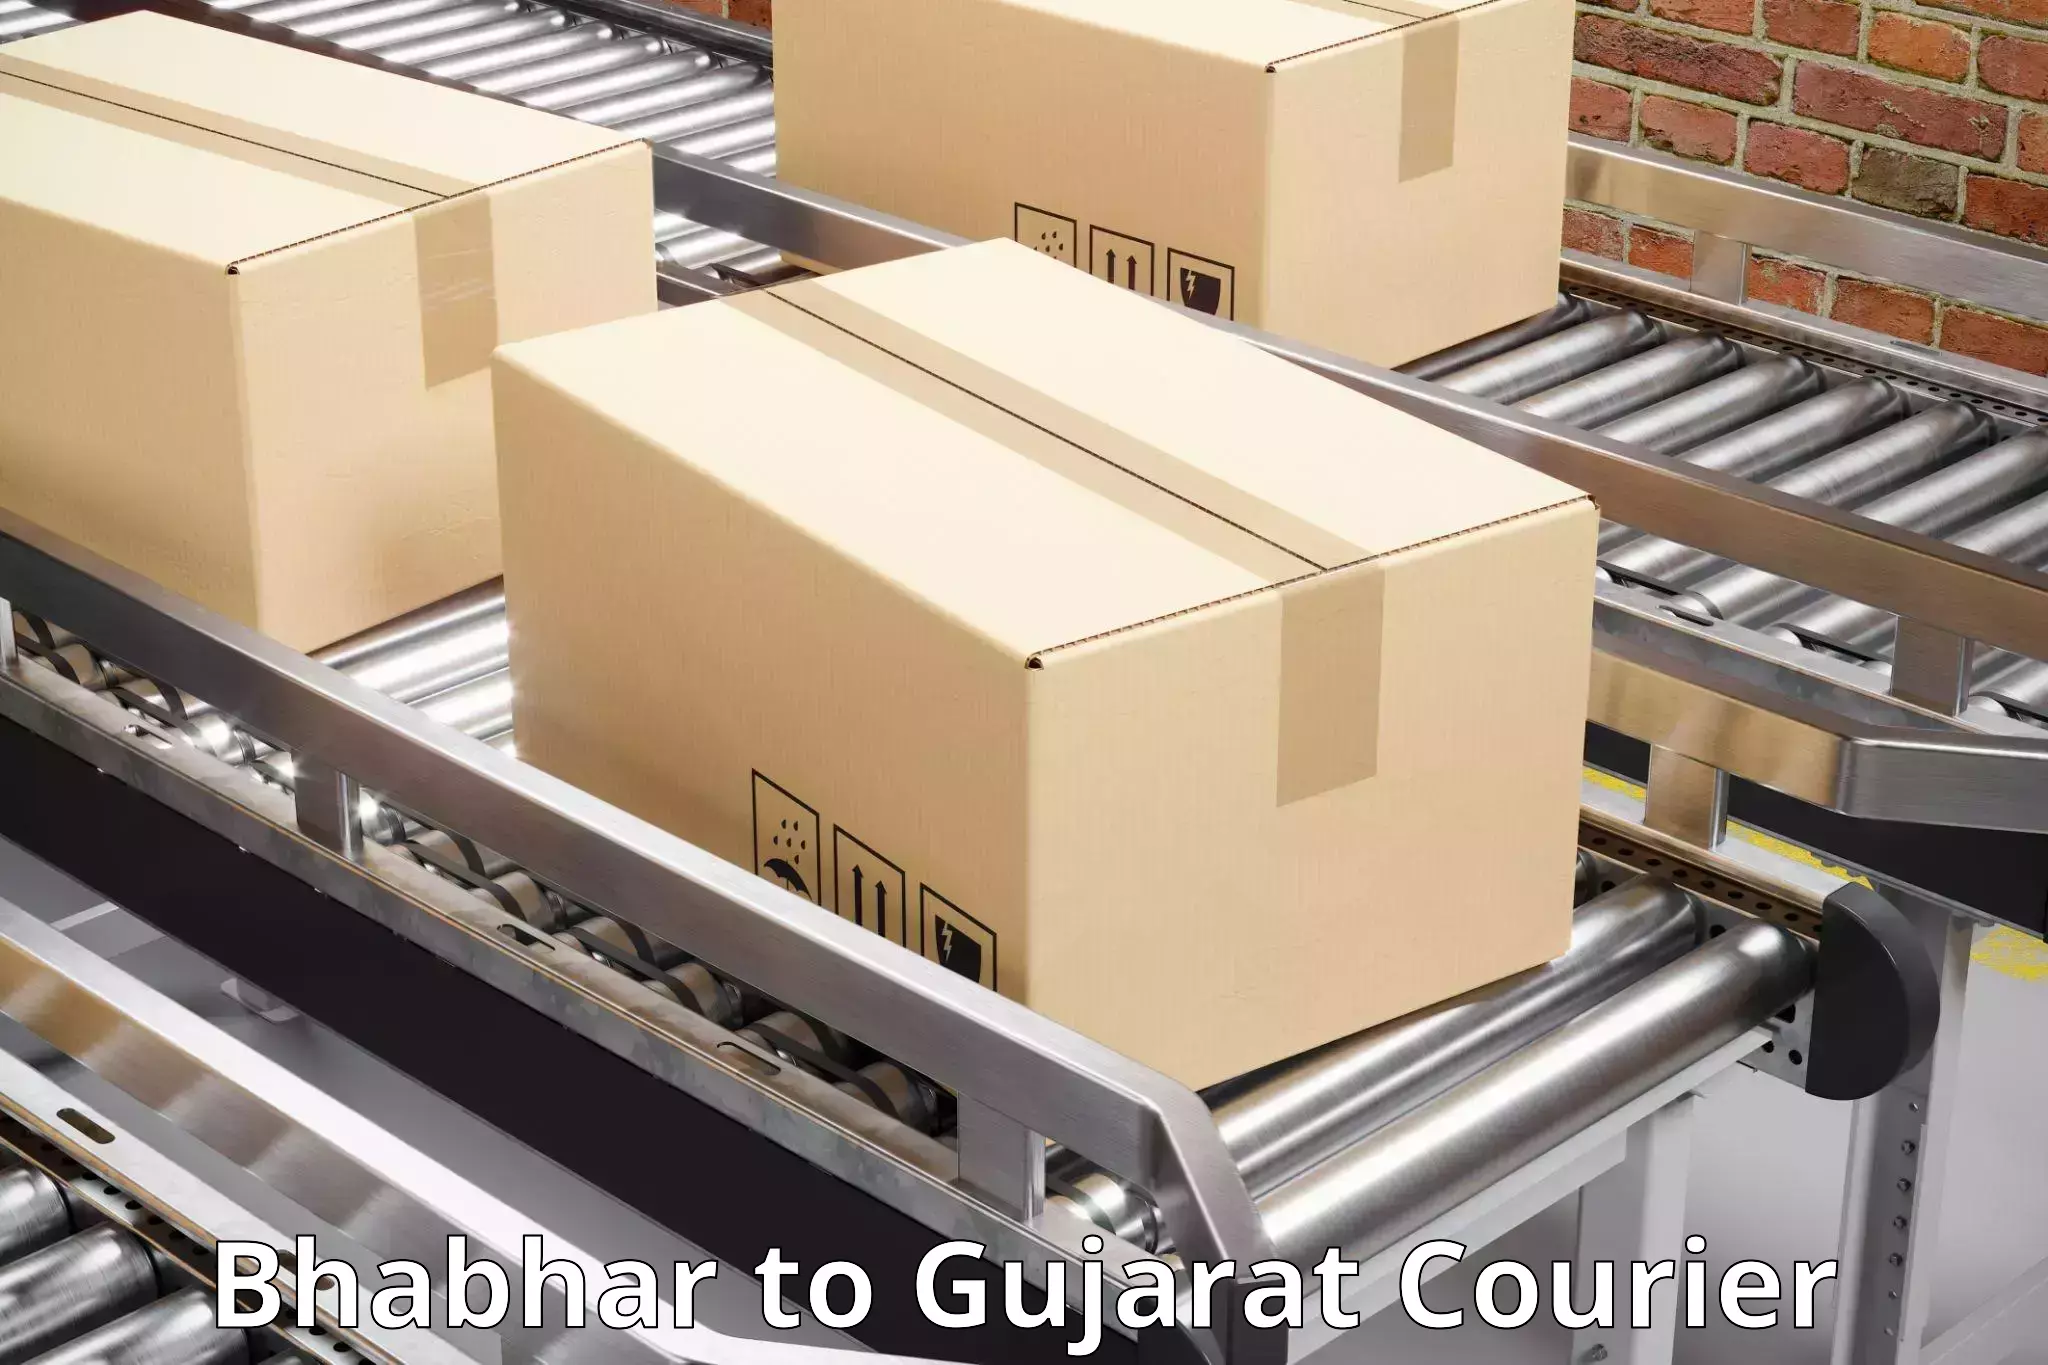 Multi-service courier options Bhabhar to Gondal